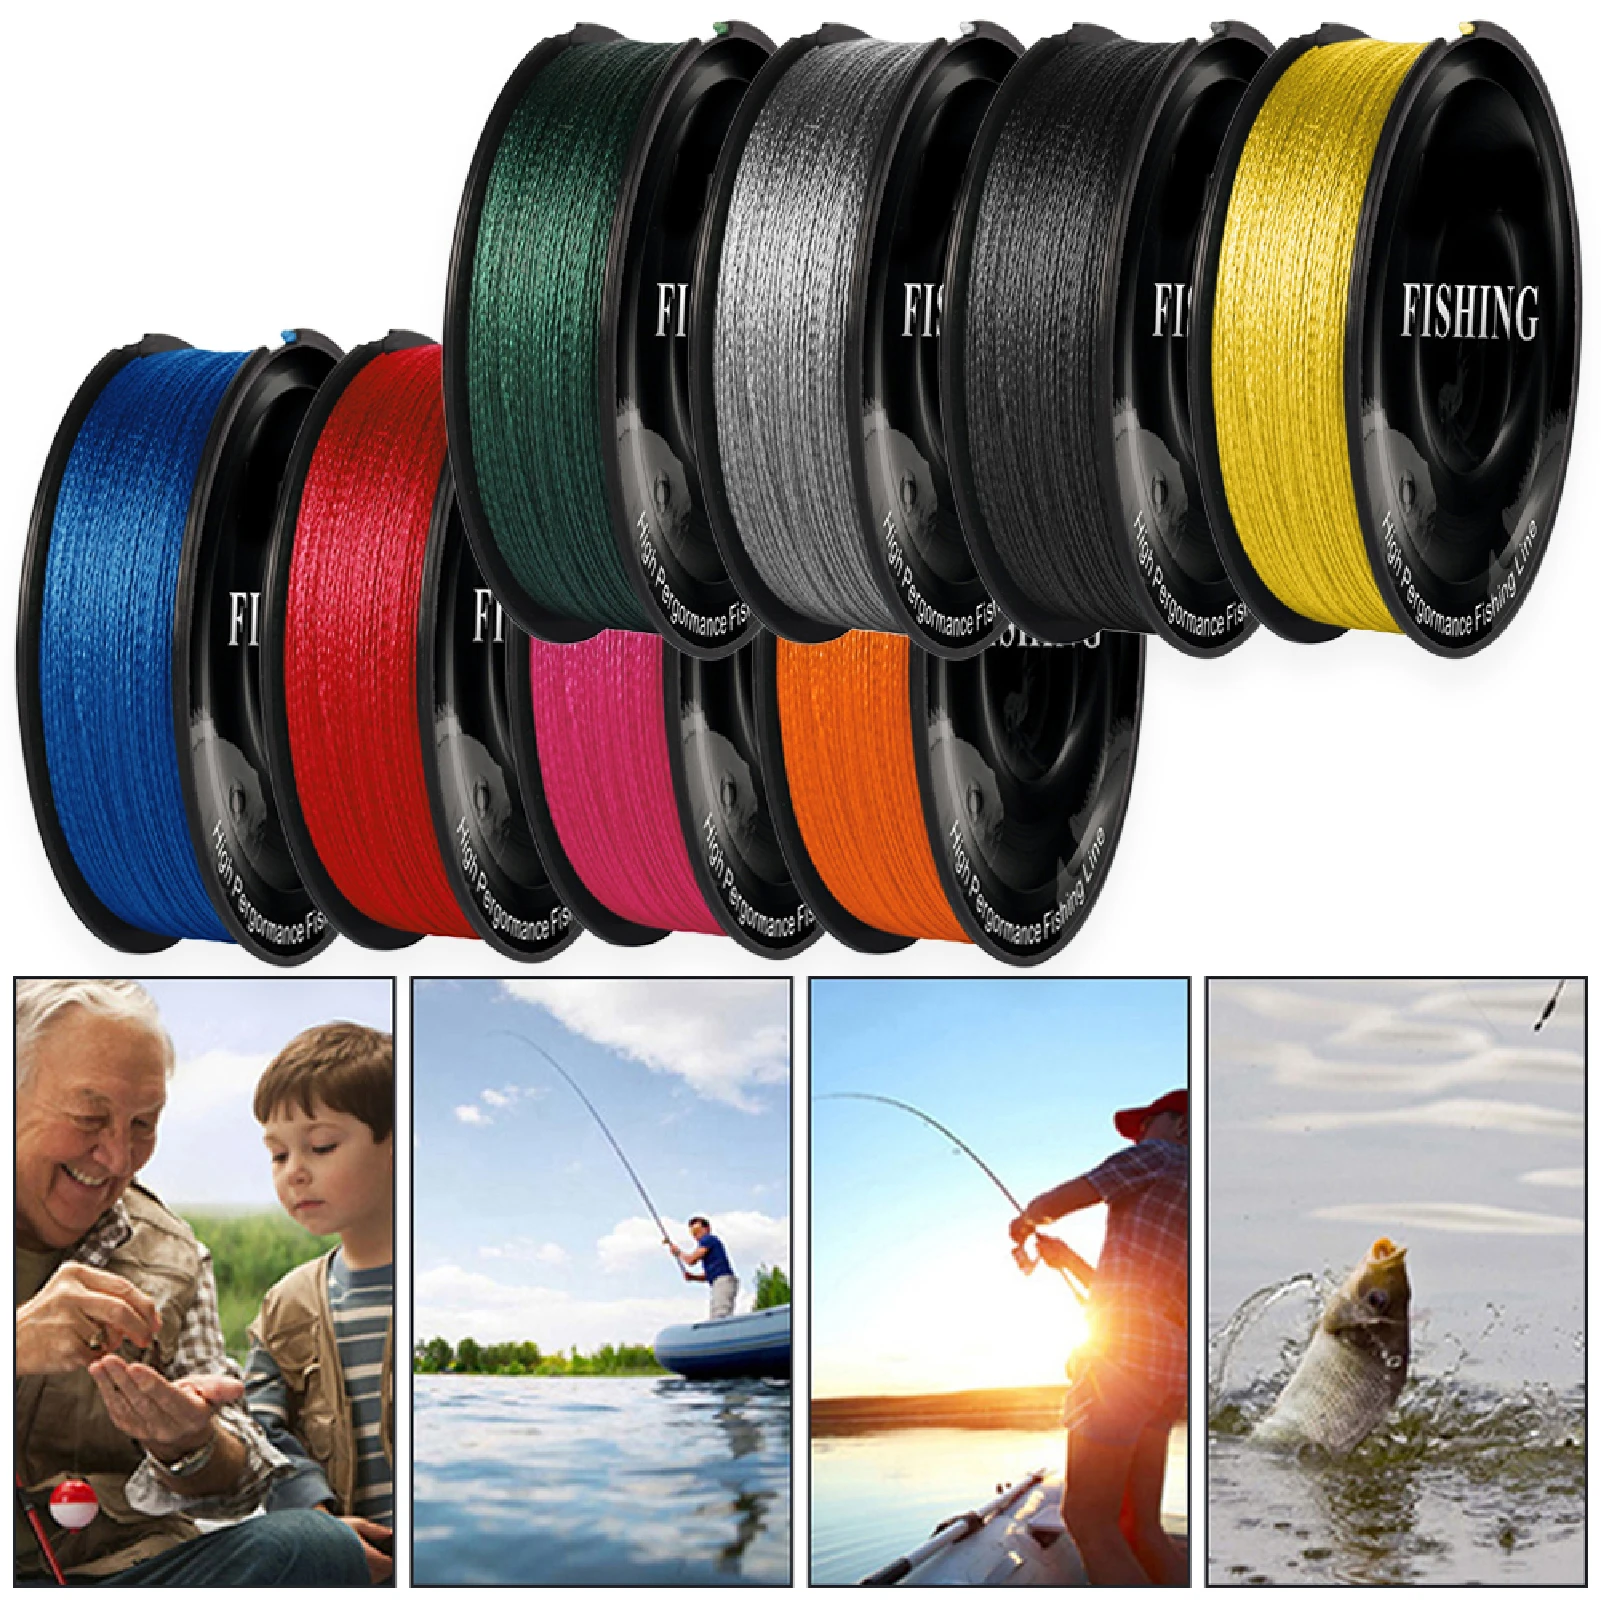 

100m Super Strong PE Fishing Line 4 Strands Weave Braided Fishing Line Rope Fish Tackle Tool Multifilament Fishing Line Smooth